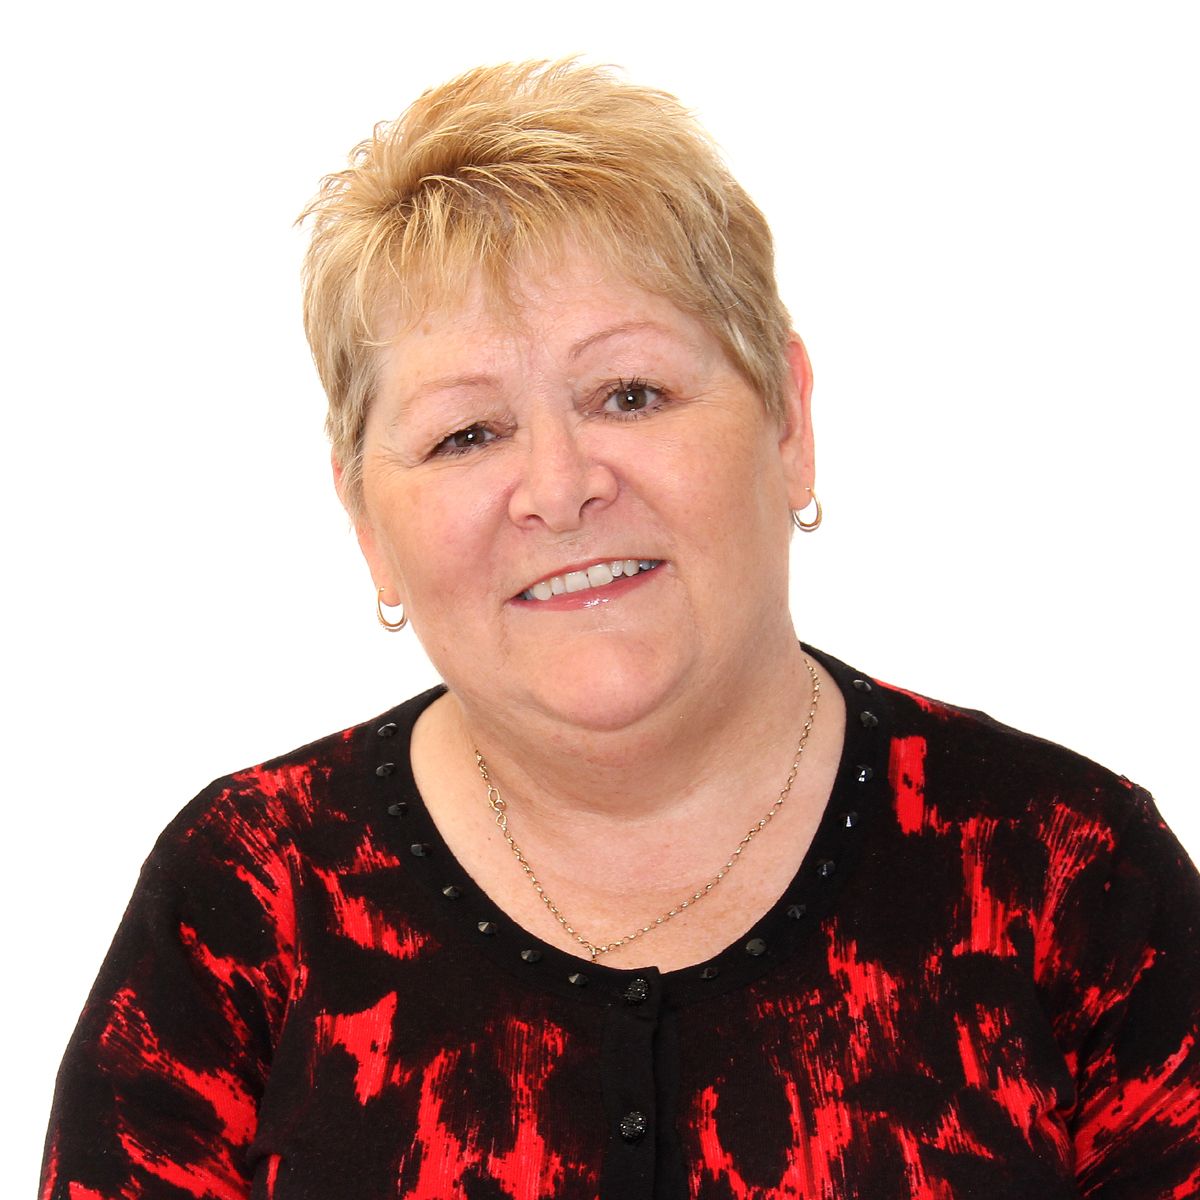 Marie Greenberry, Service Director for Deanston House